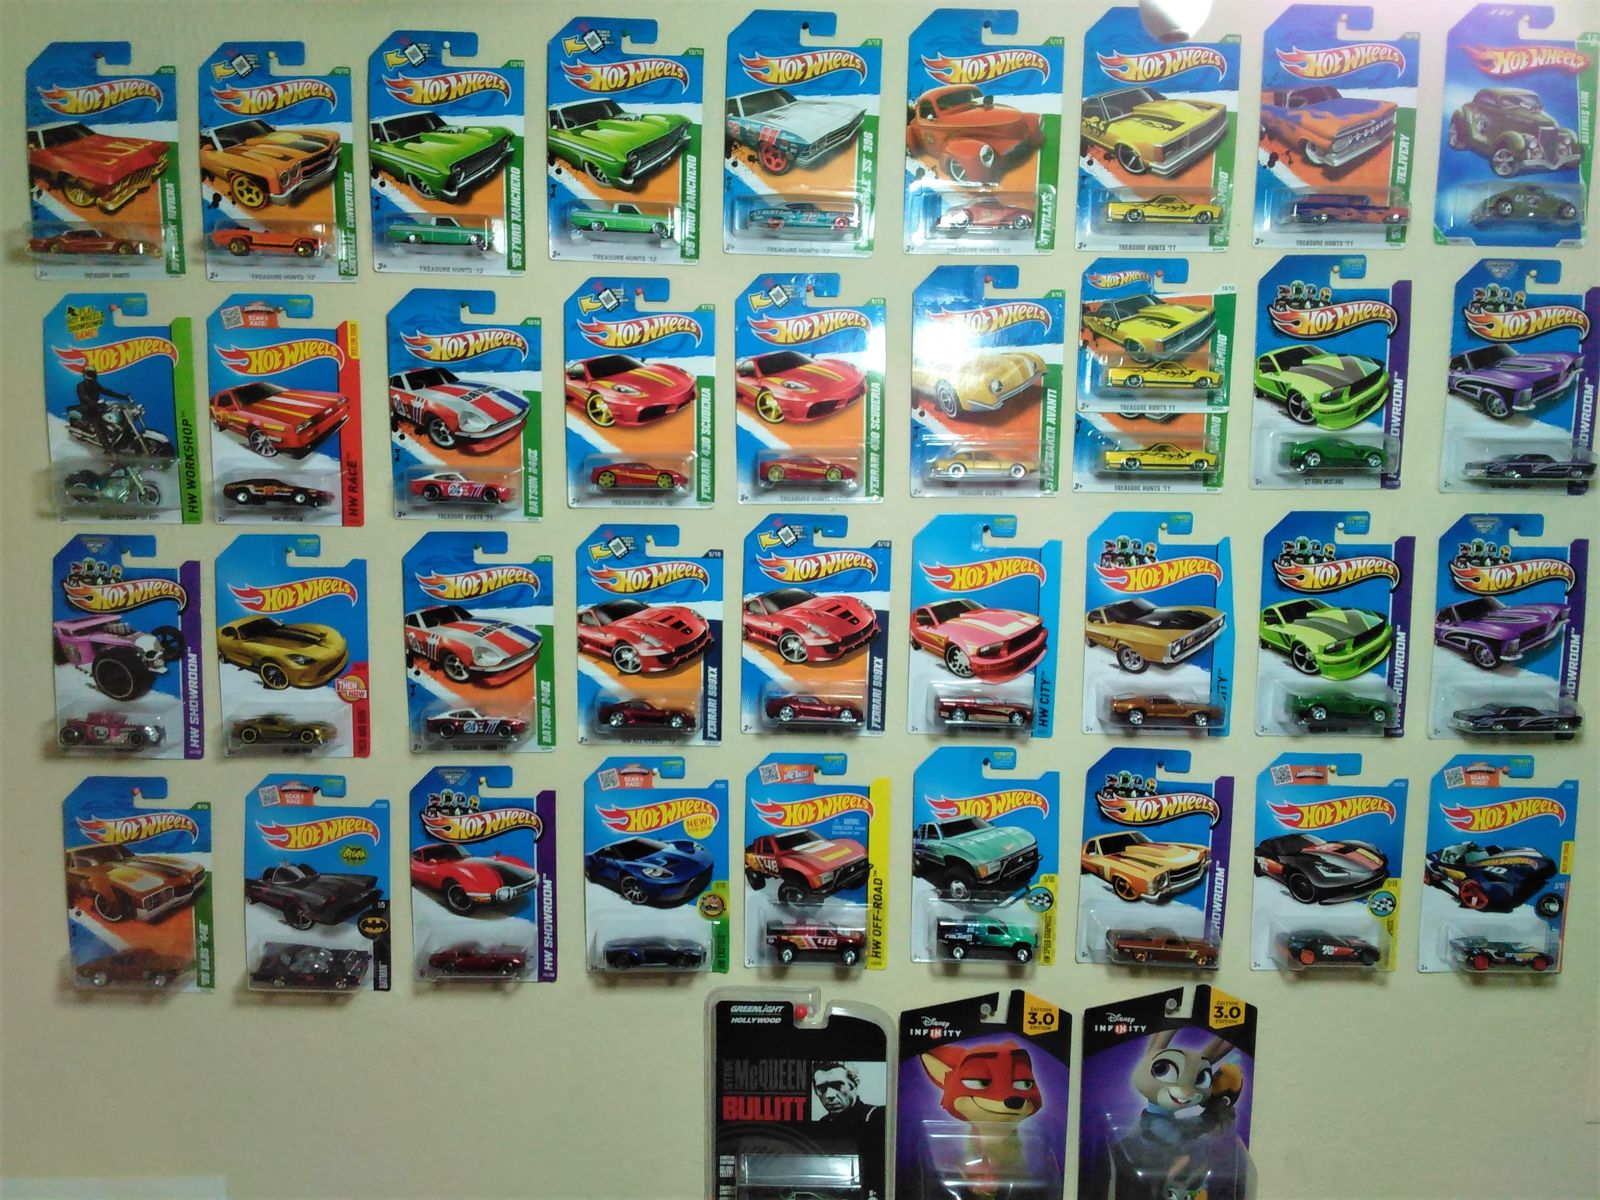 Position of cars on wall is subject to change